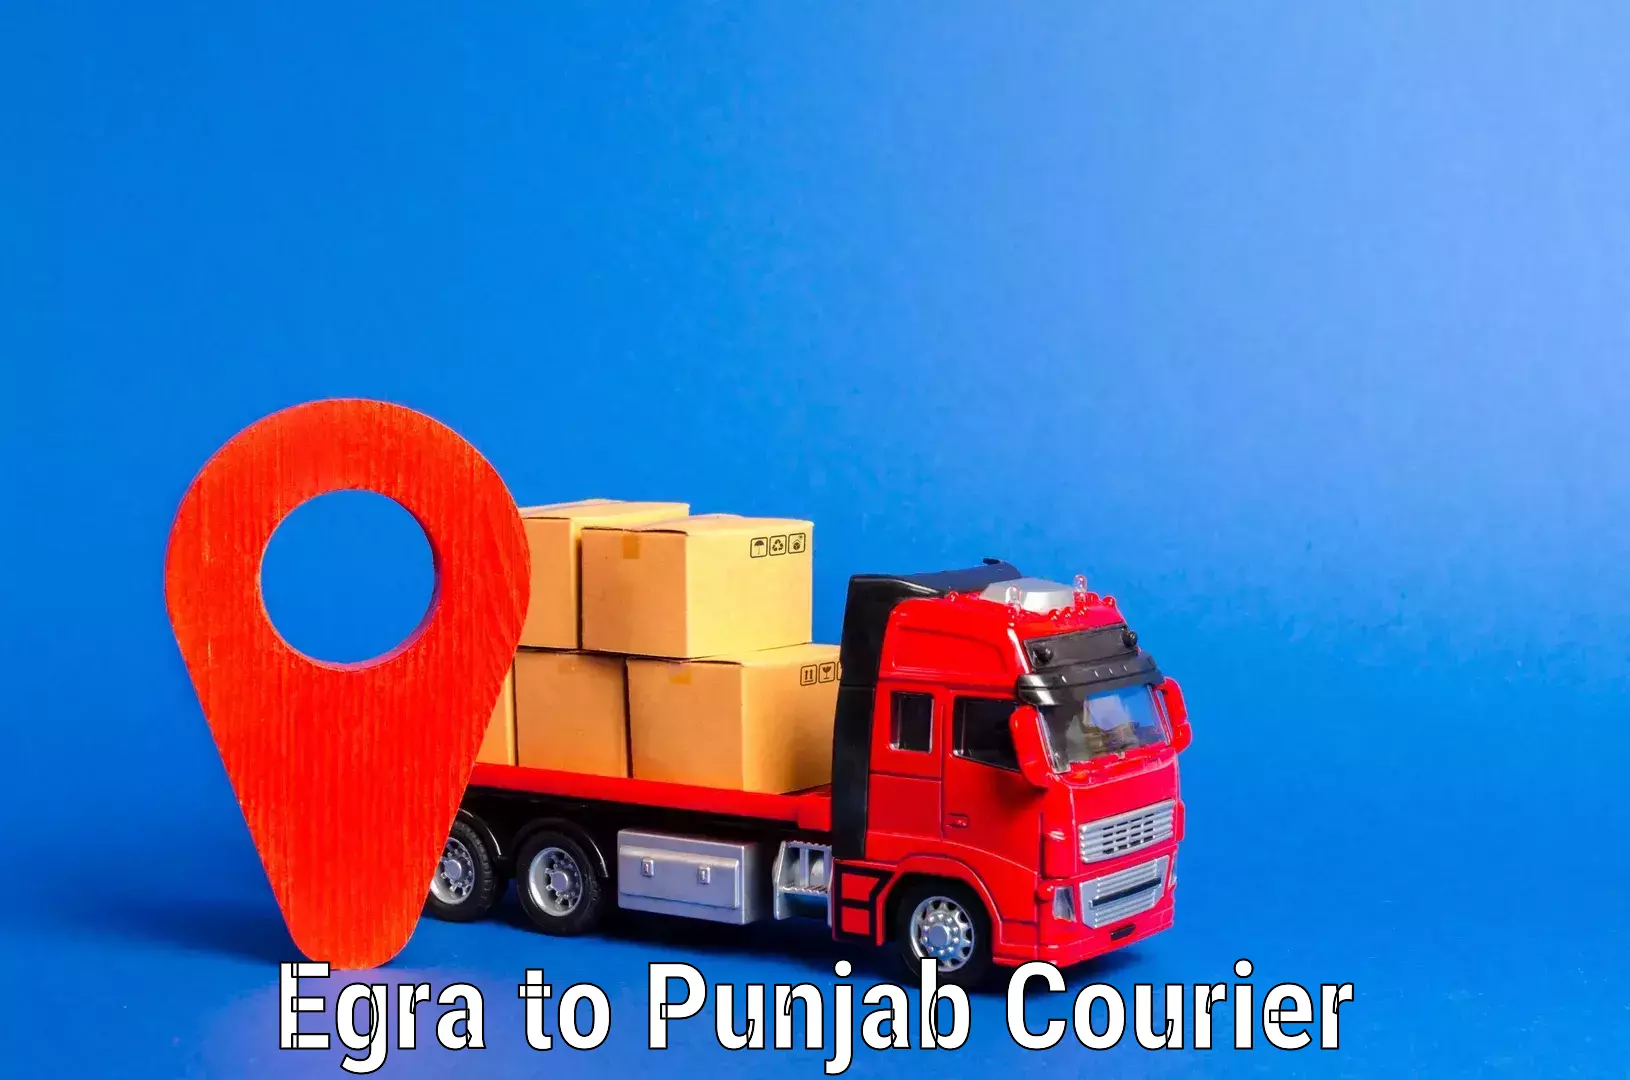 Household transport services Egra to Punjab